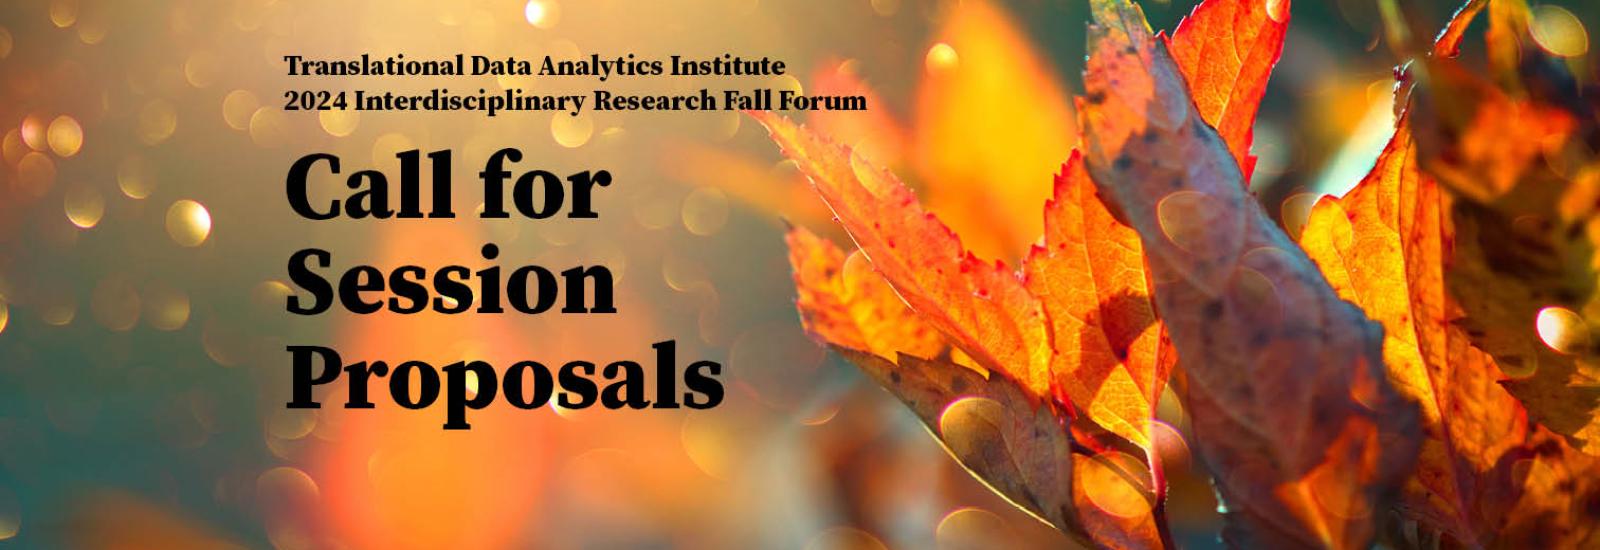 Title Card: 2024 Interdisciplinary Research Fall Forum - Call for Session Proposals